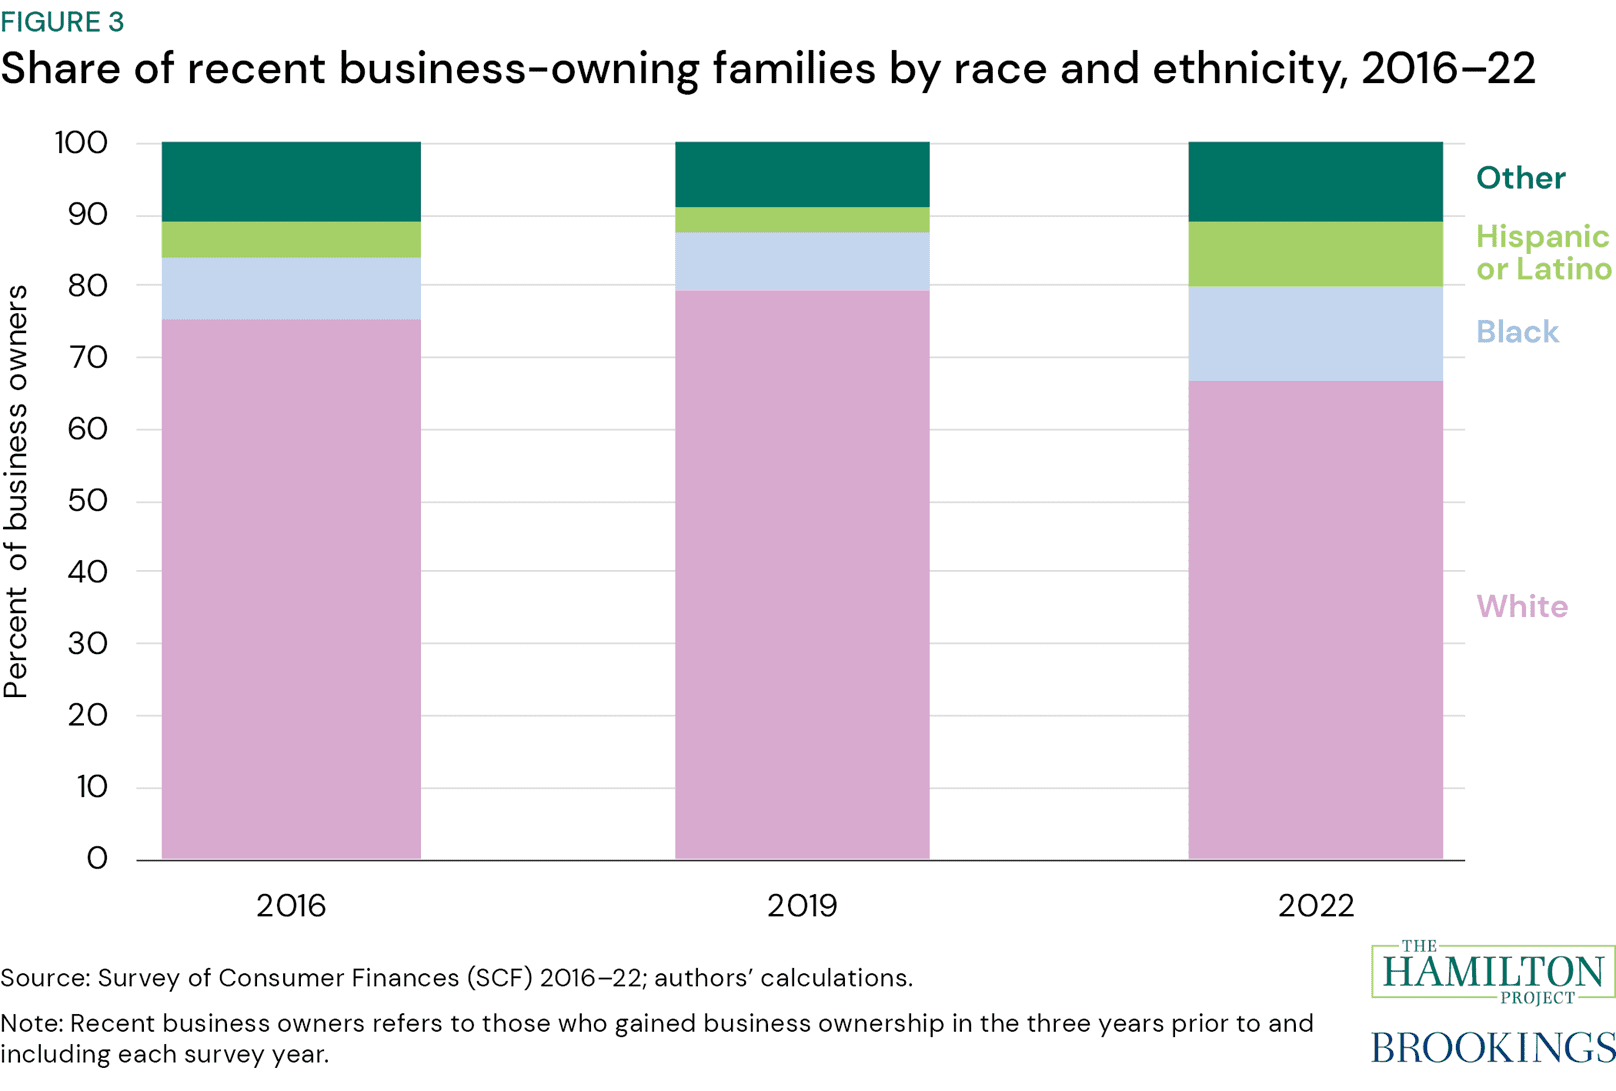 Figure 3: Share of recent business-owning families by race and ethnicity, 2016-22. Figure 3 shows the composition of owners of employer businesses by race and ethnicity, for families who gained ownership in the three years prior to and including each survey year.